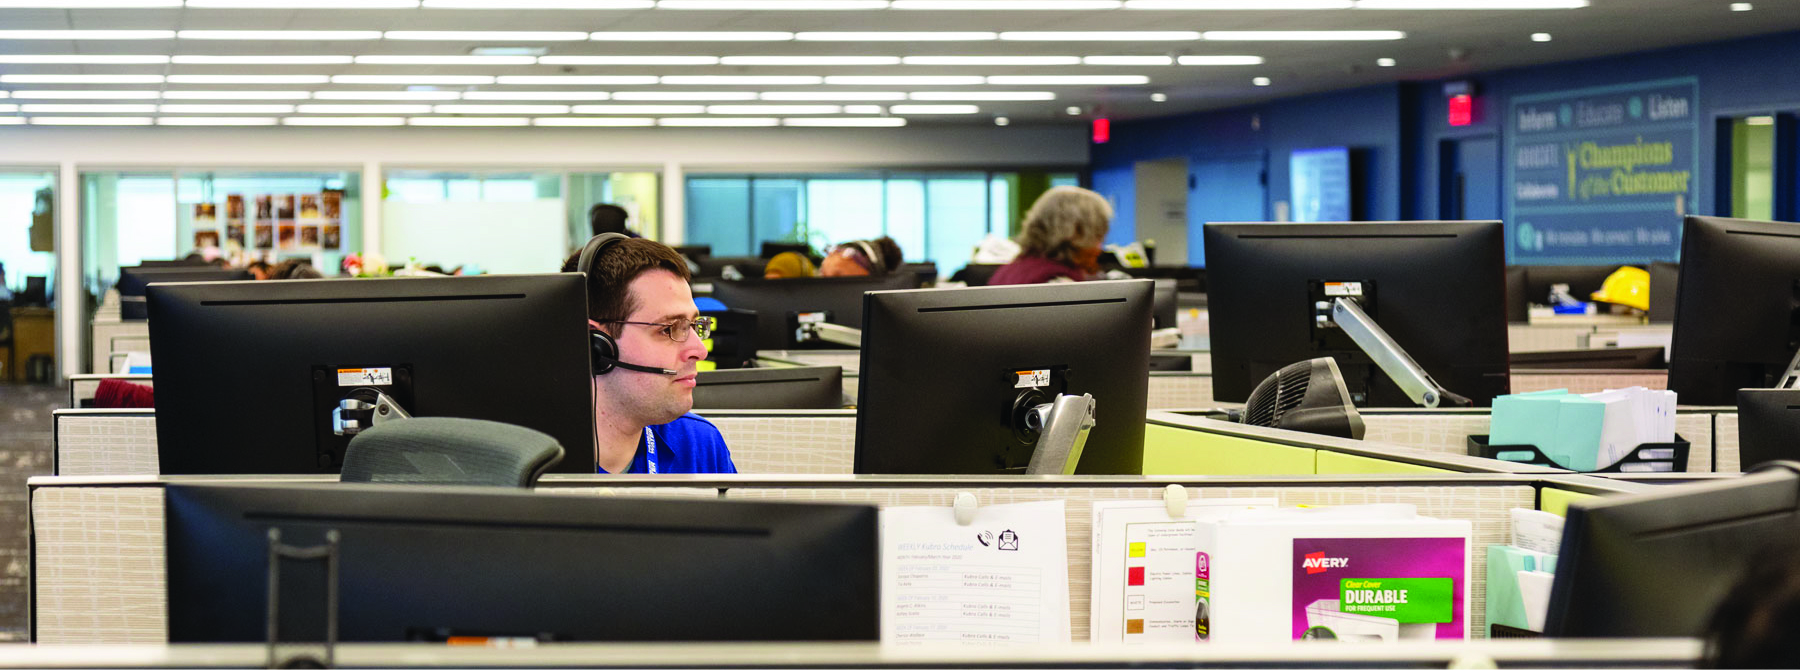 A glimpse into the Philadelphia Water Department Contact Center: pairs of computer monitors on movable arms peek above low cubicle walls. In one of the nearest cubes, a representative with short brown hair, glasses, a bit of a five-o-clock shadow, and a headset looks at a monitor. Others are partially visible, though out of focus, in the distance, against a backdrop of glass-walled offices and a conference room, and one side wall painted dark blue.